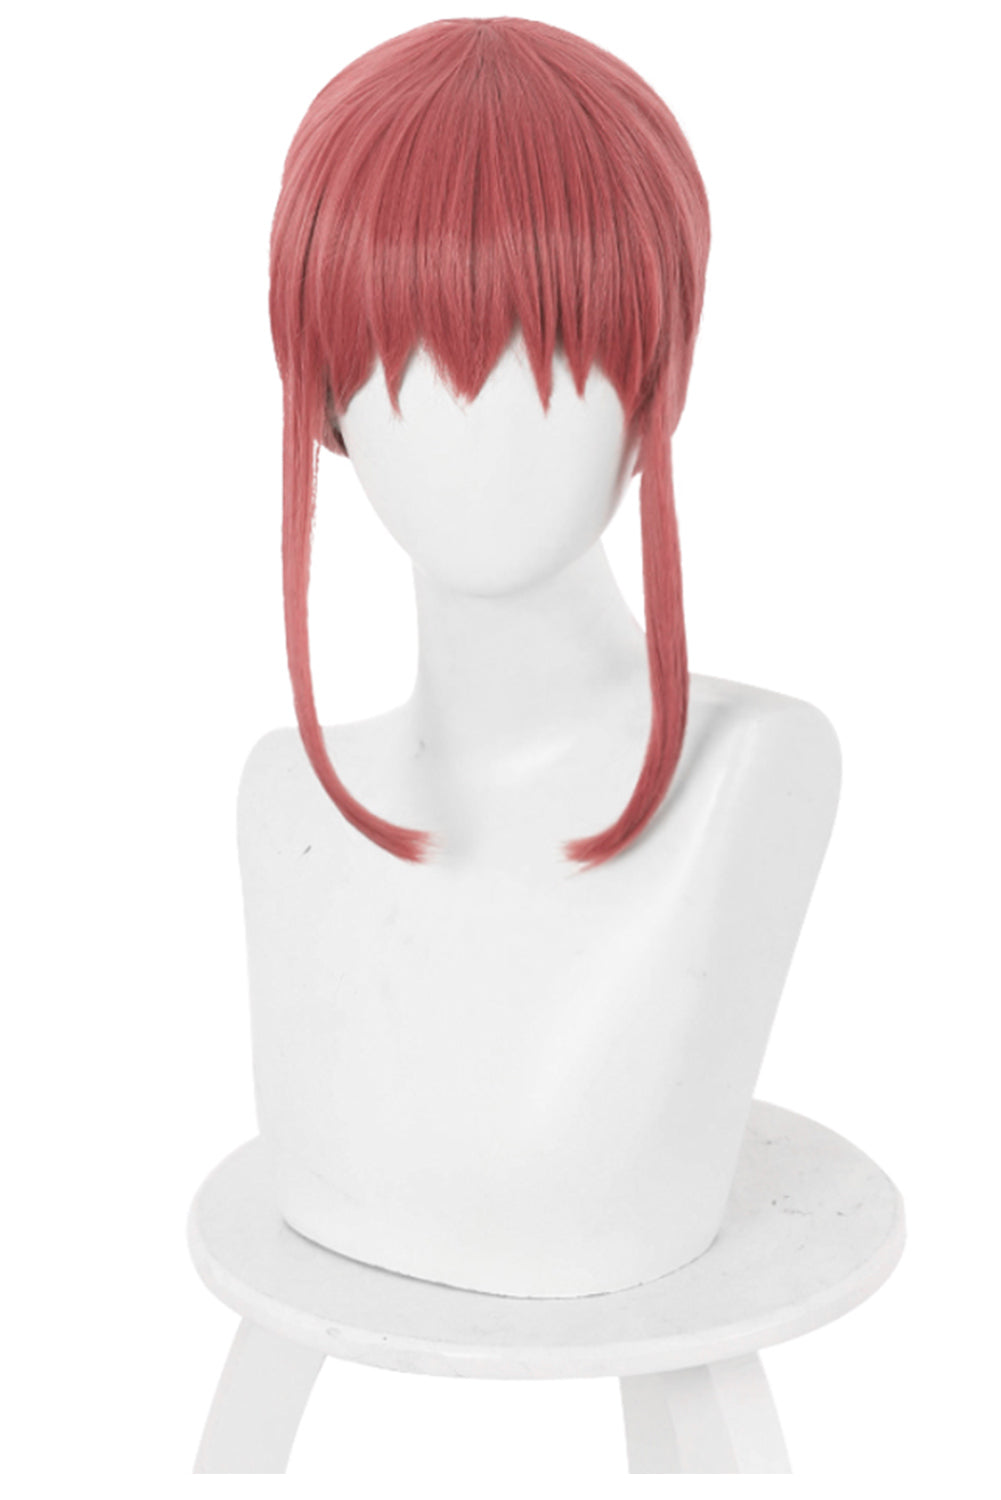 Anime Chensō Man Makima Cosplay Perruque Cheveux Cosplay Accessoires